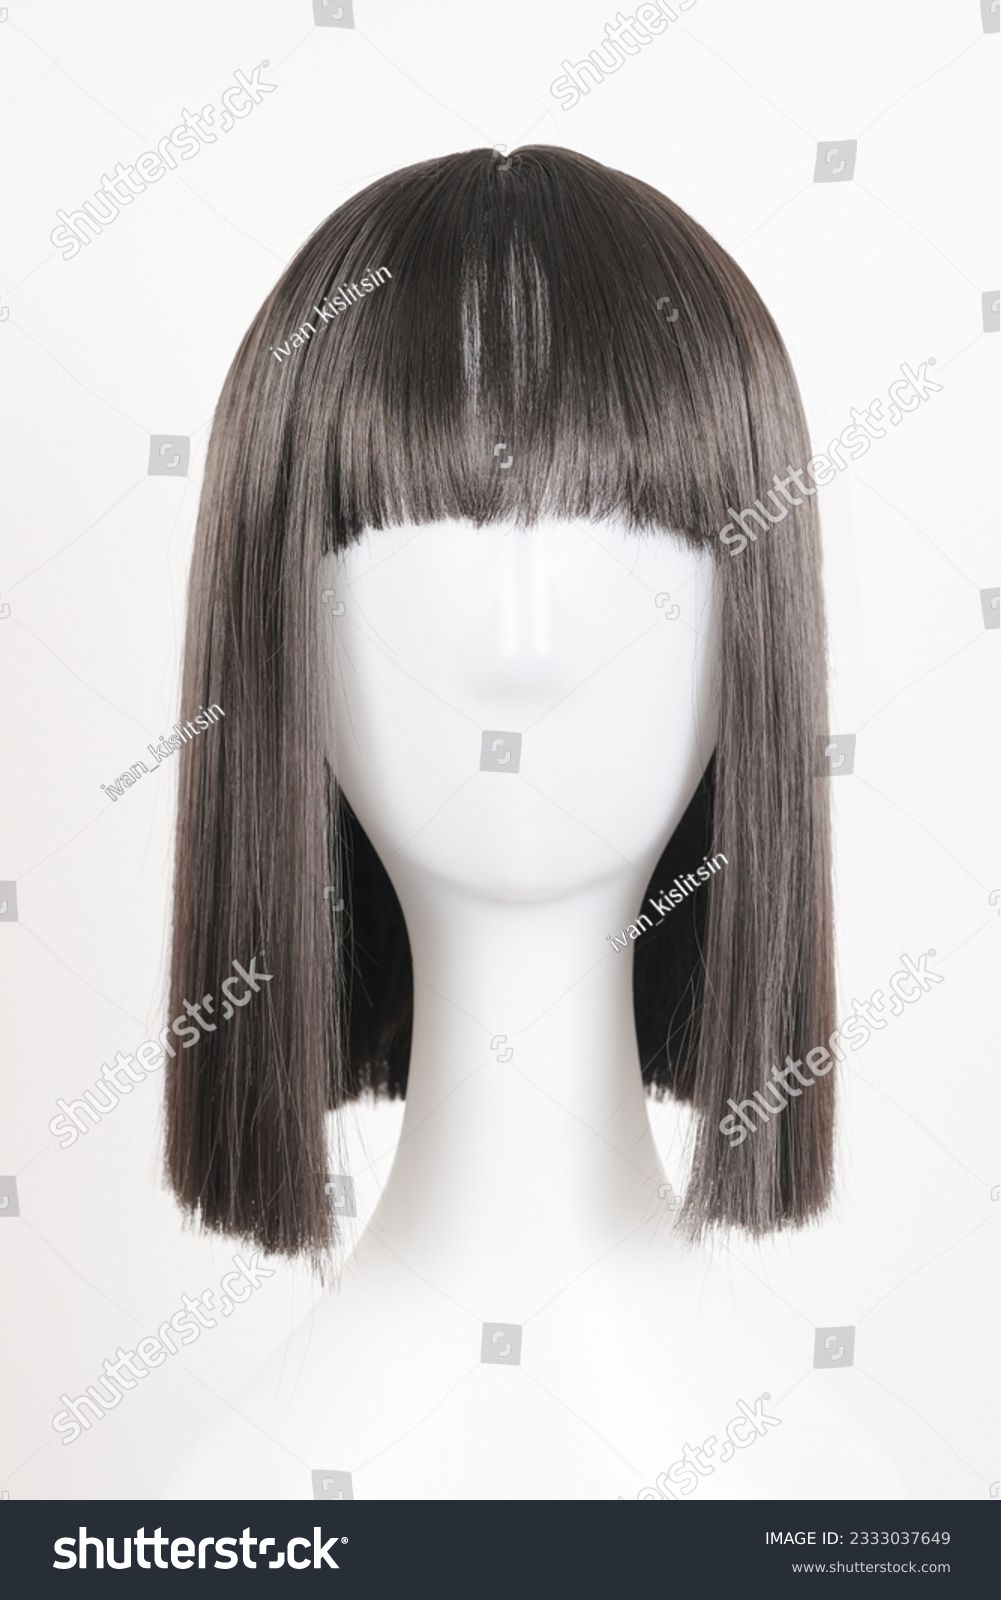 Natural looking black wig on white mannequin head. Medium length straight hair with bangs on the metal wig holder isolated on white background, front view #2333037649